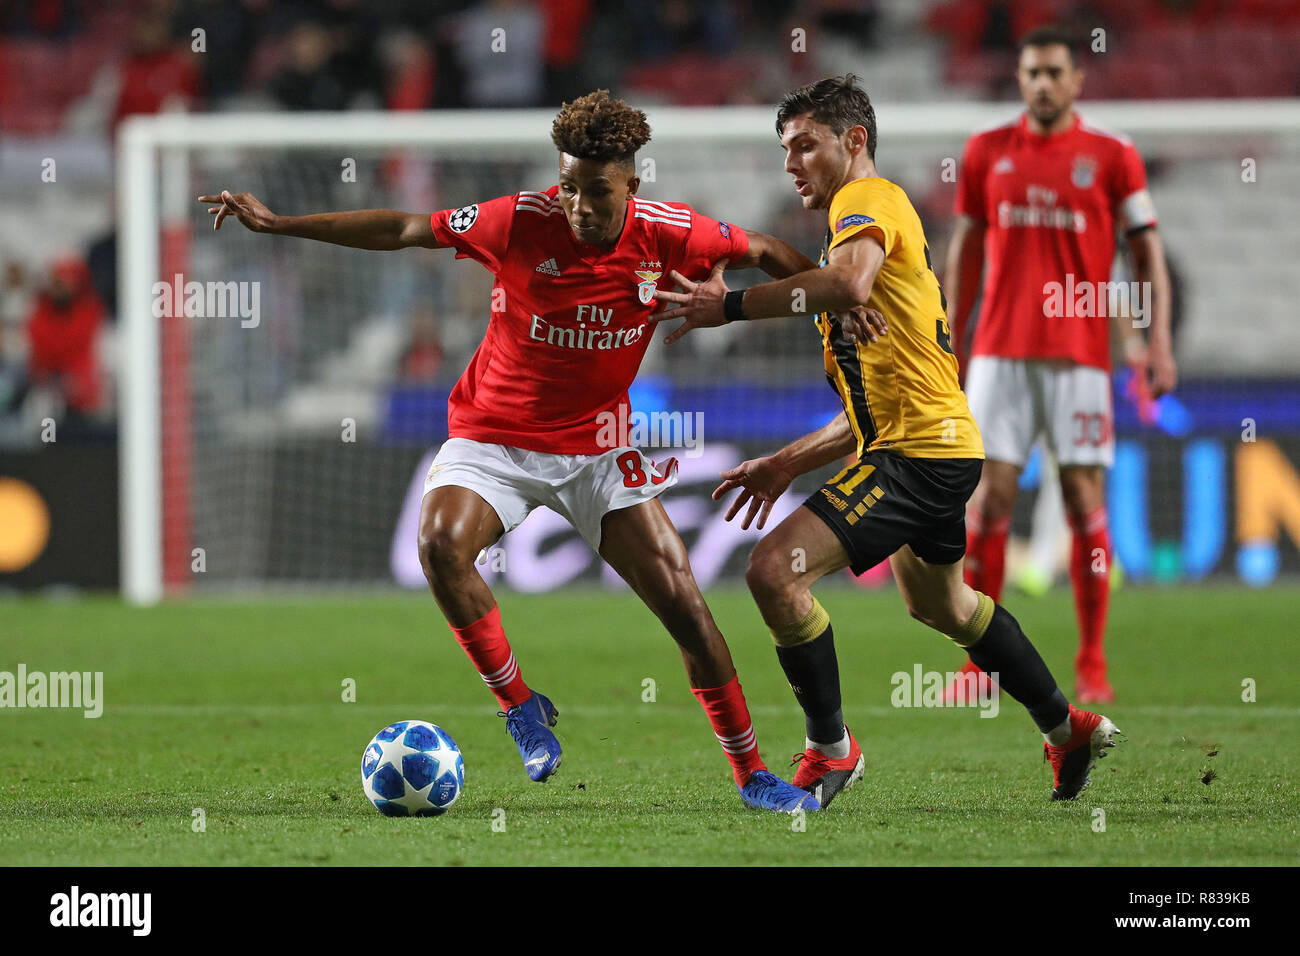 Gedson Fernandes of SL Benfica (L) vies for the ball with Lucas Boyé of AEK  Athens F.C. (R) during the UEFA Champions League 2018/19 football match  between SL Benfica vs AEK Athens